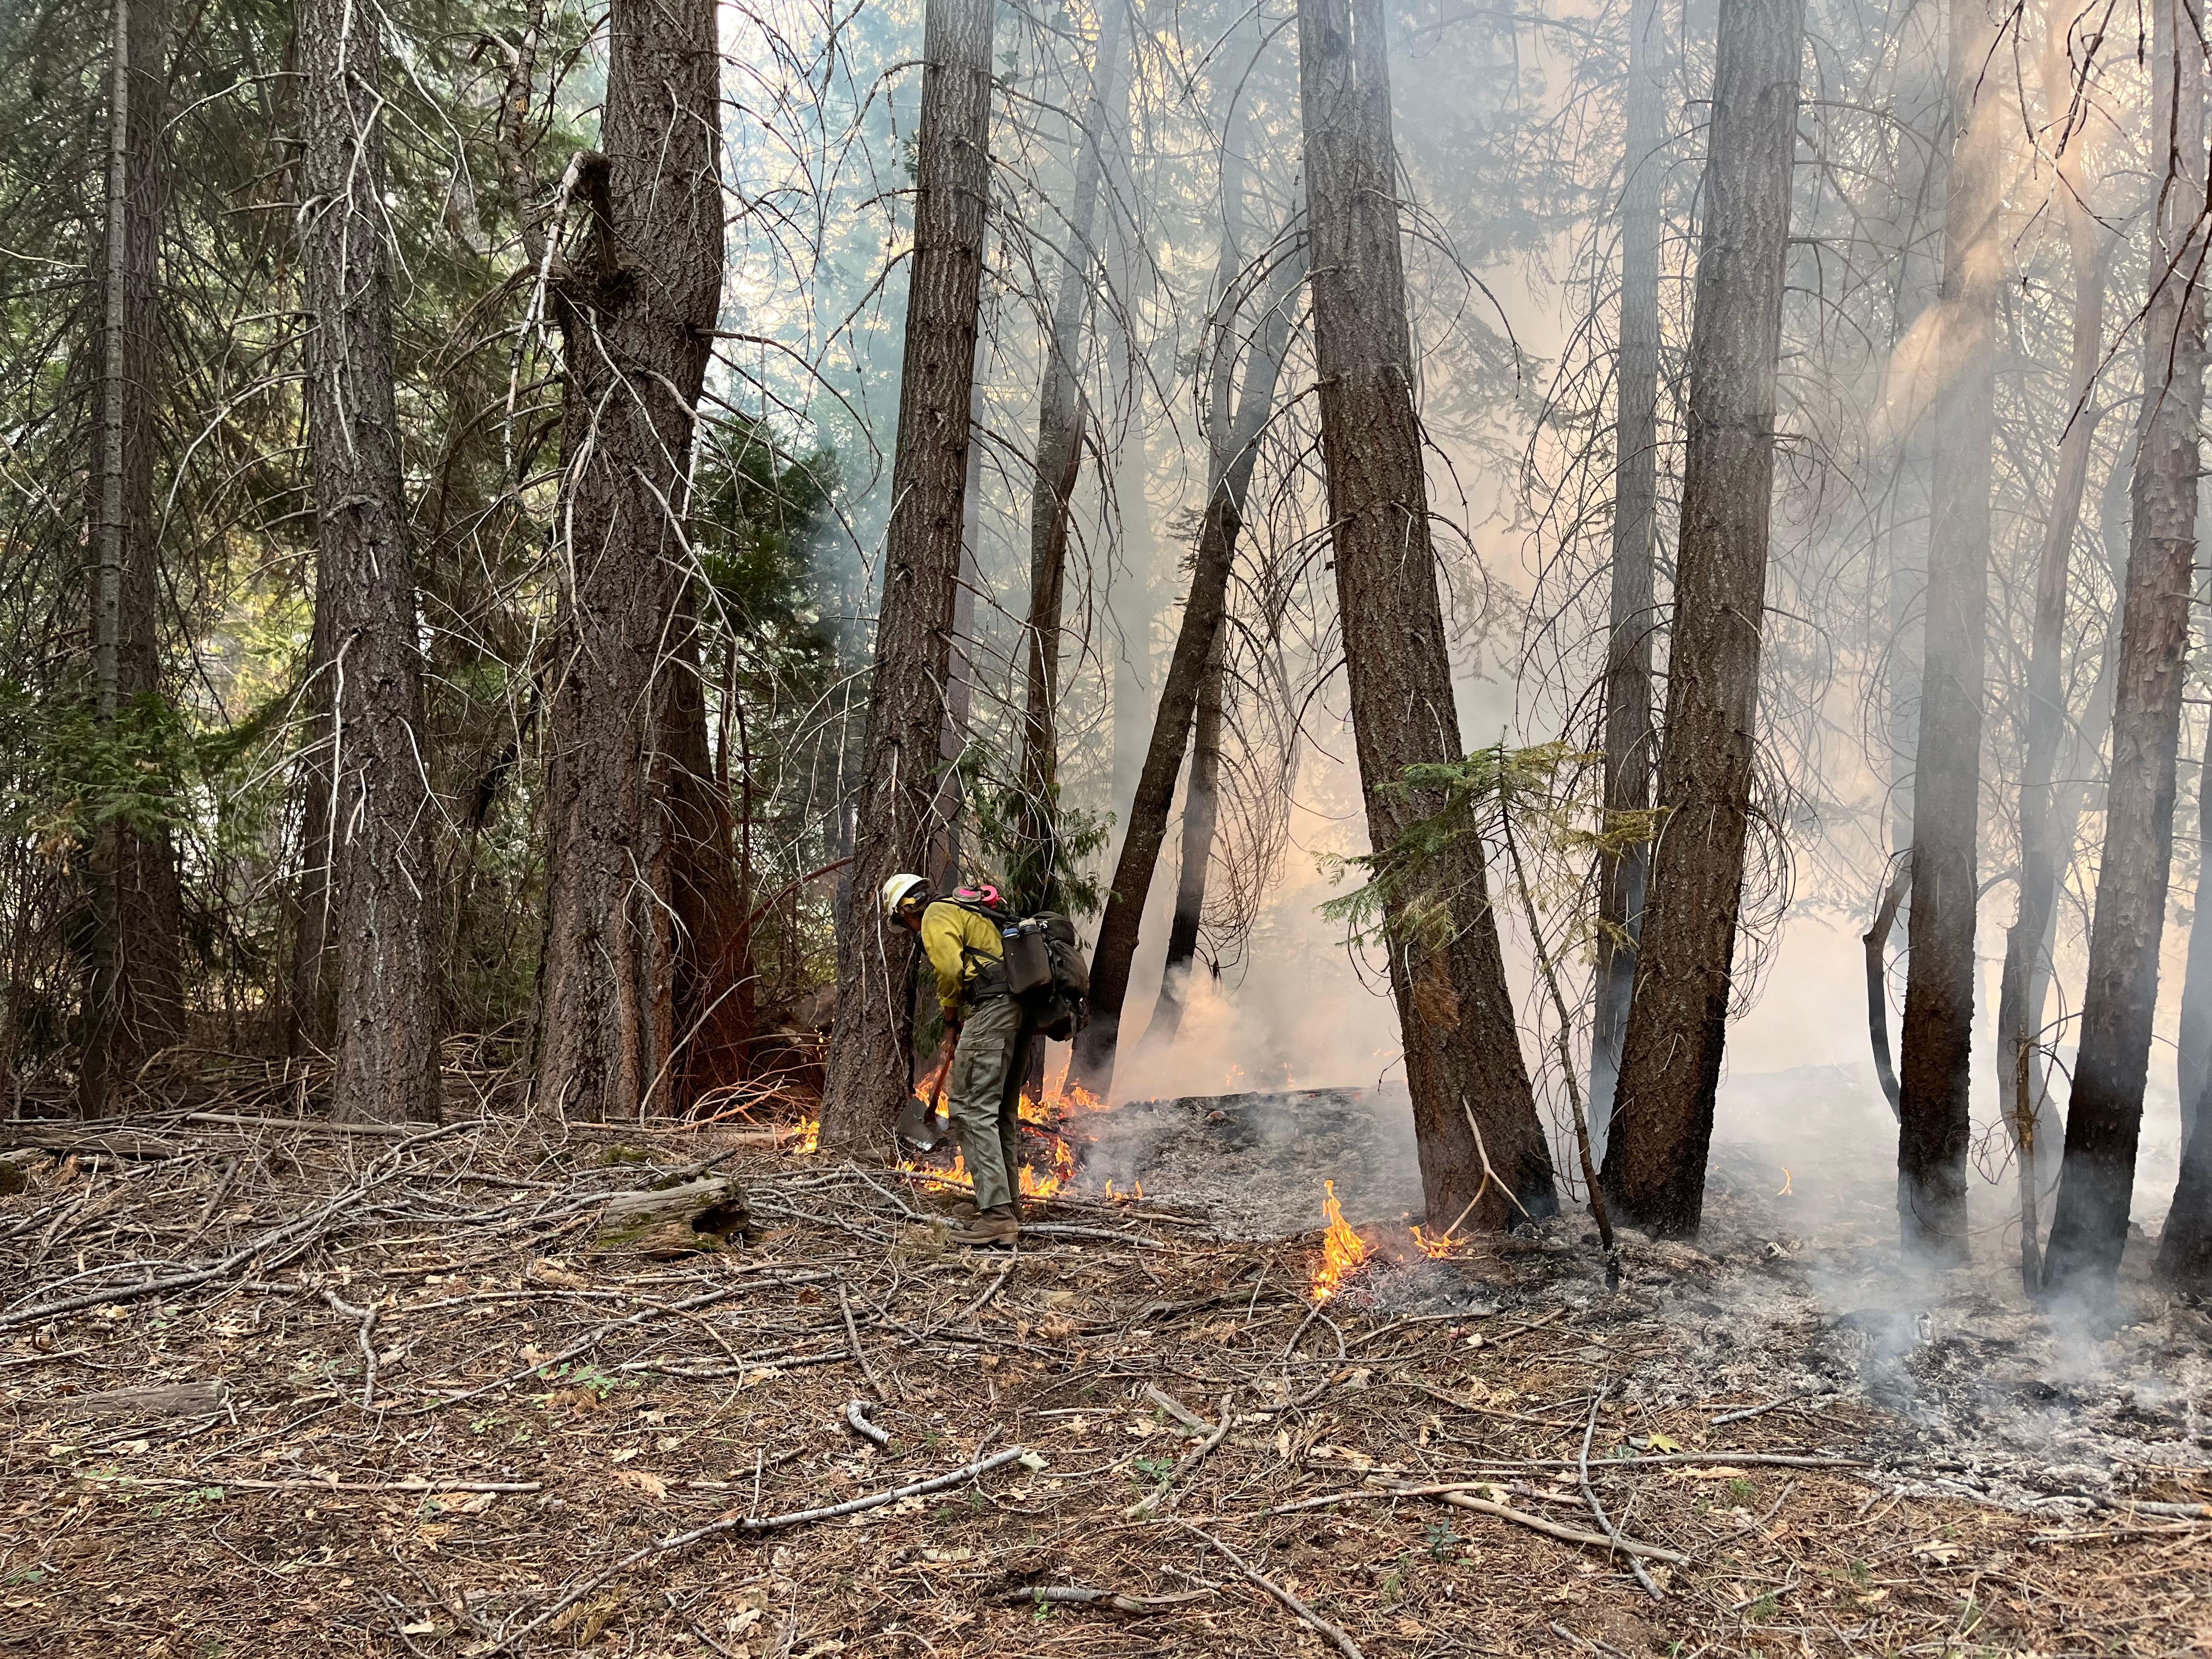 among large trees and no brush, a male firefighter drips flame from a handheld canister to ignite the ground vegetation. Low flames are starting to burn the needles and sticks that layer the forest floor and smoke is starting to rise.